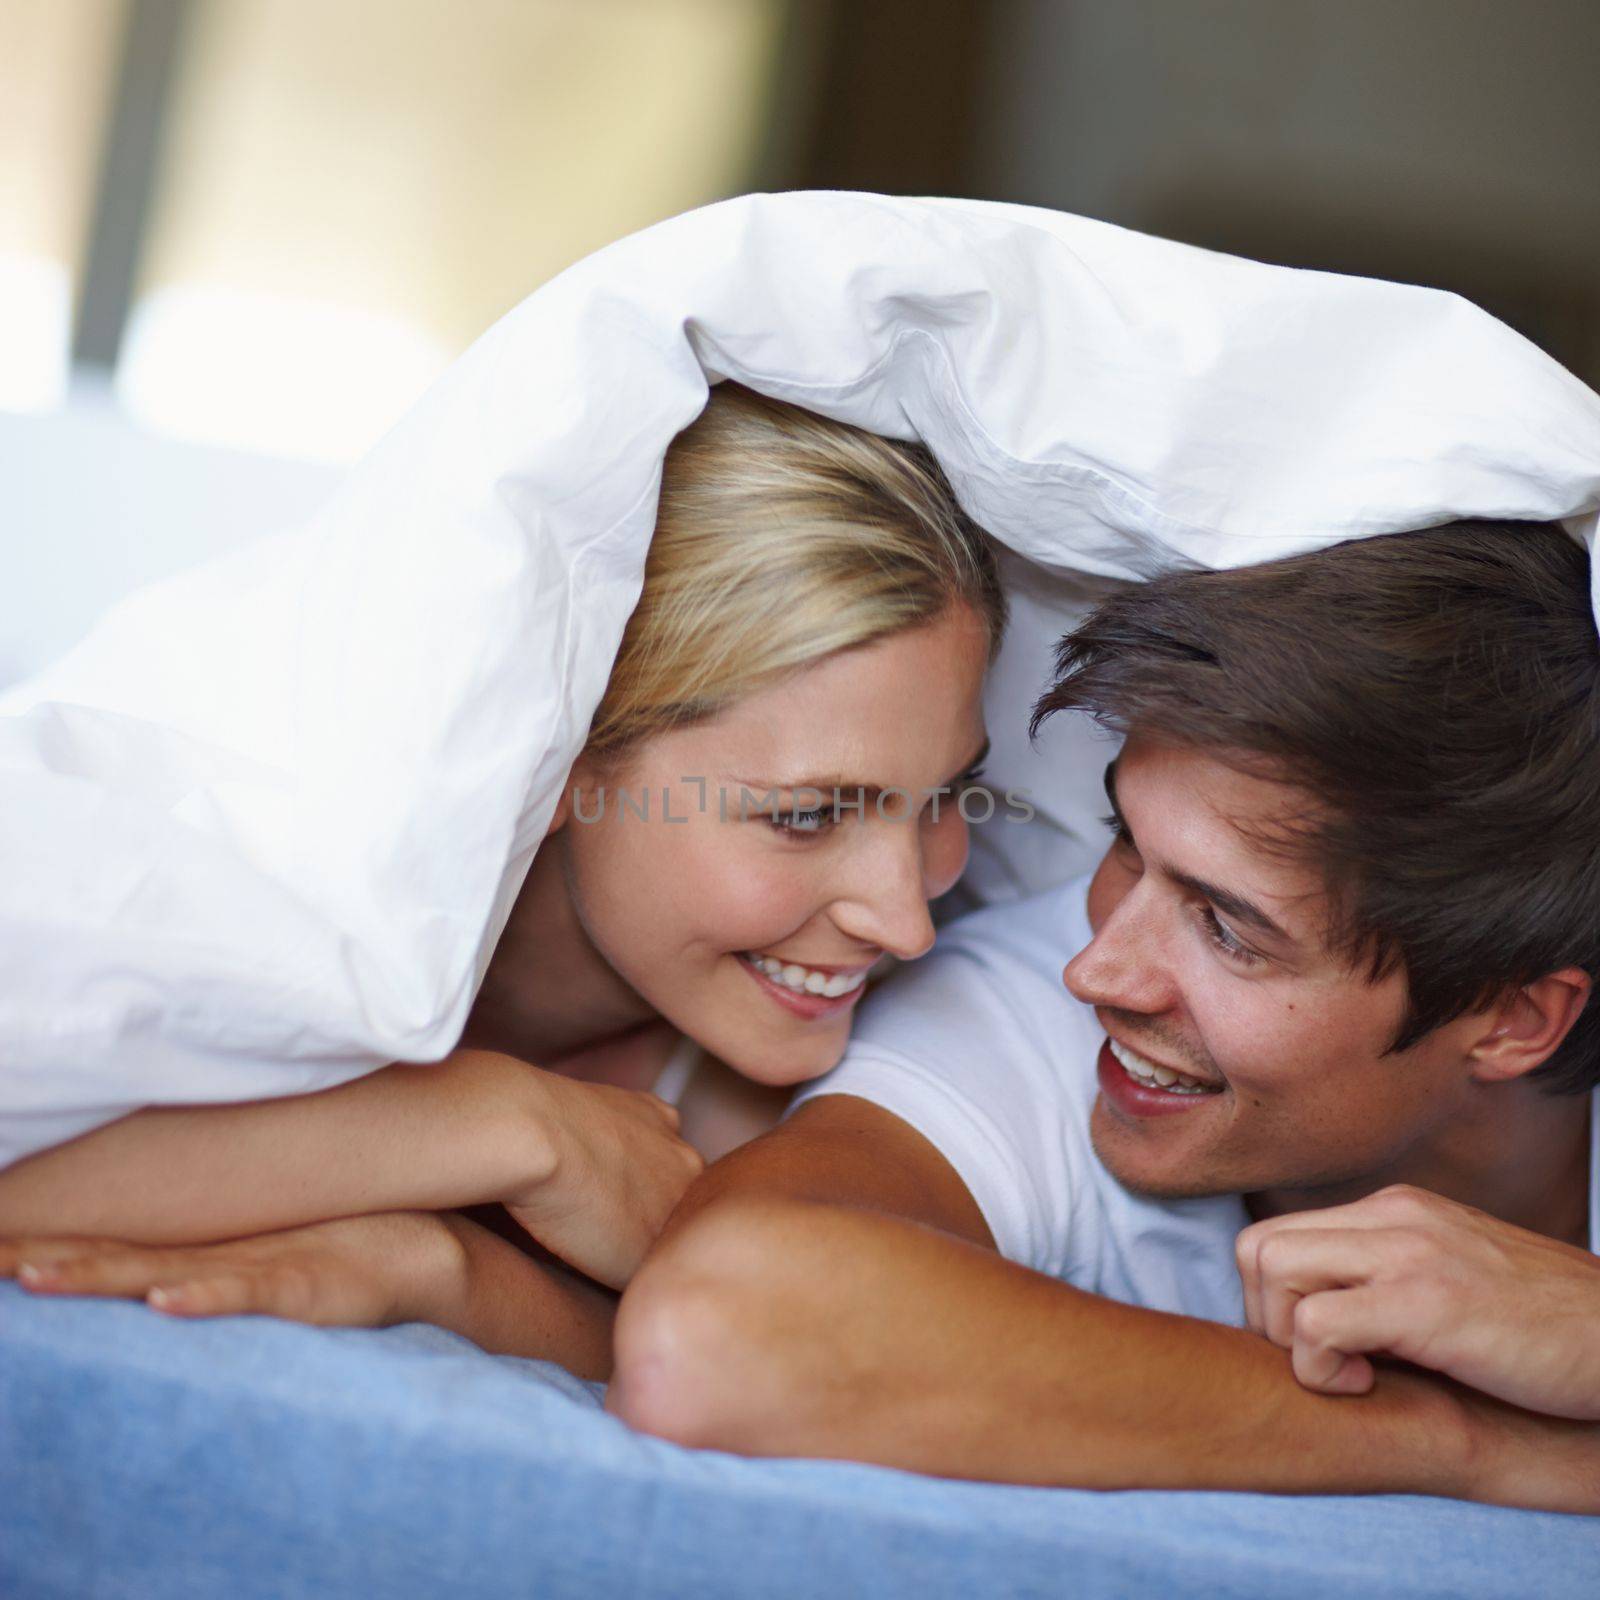 You, me and a blankie. a happy young couple enjoying a playful moment underneath the duvet. by YuriArcurs